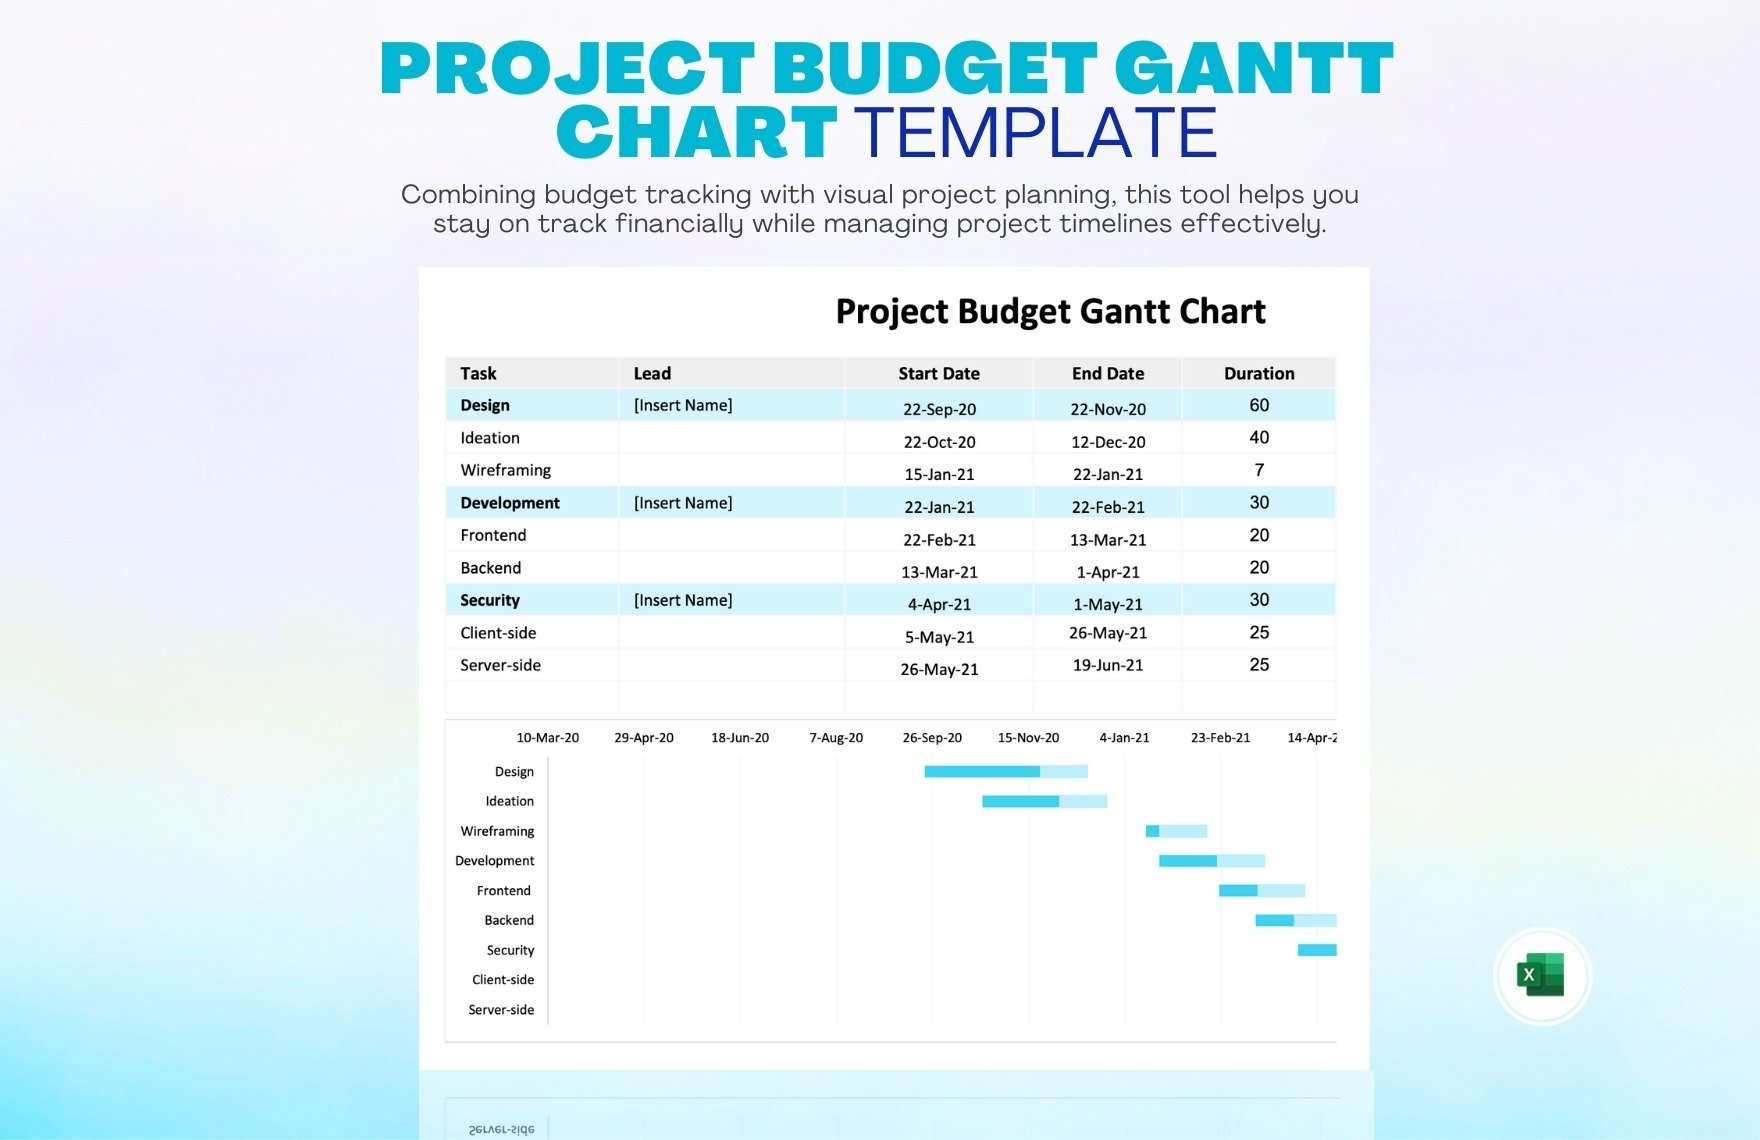 Project Budget Gantt Chart Template in Excel